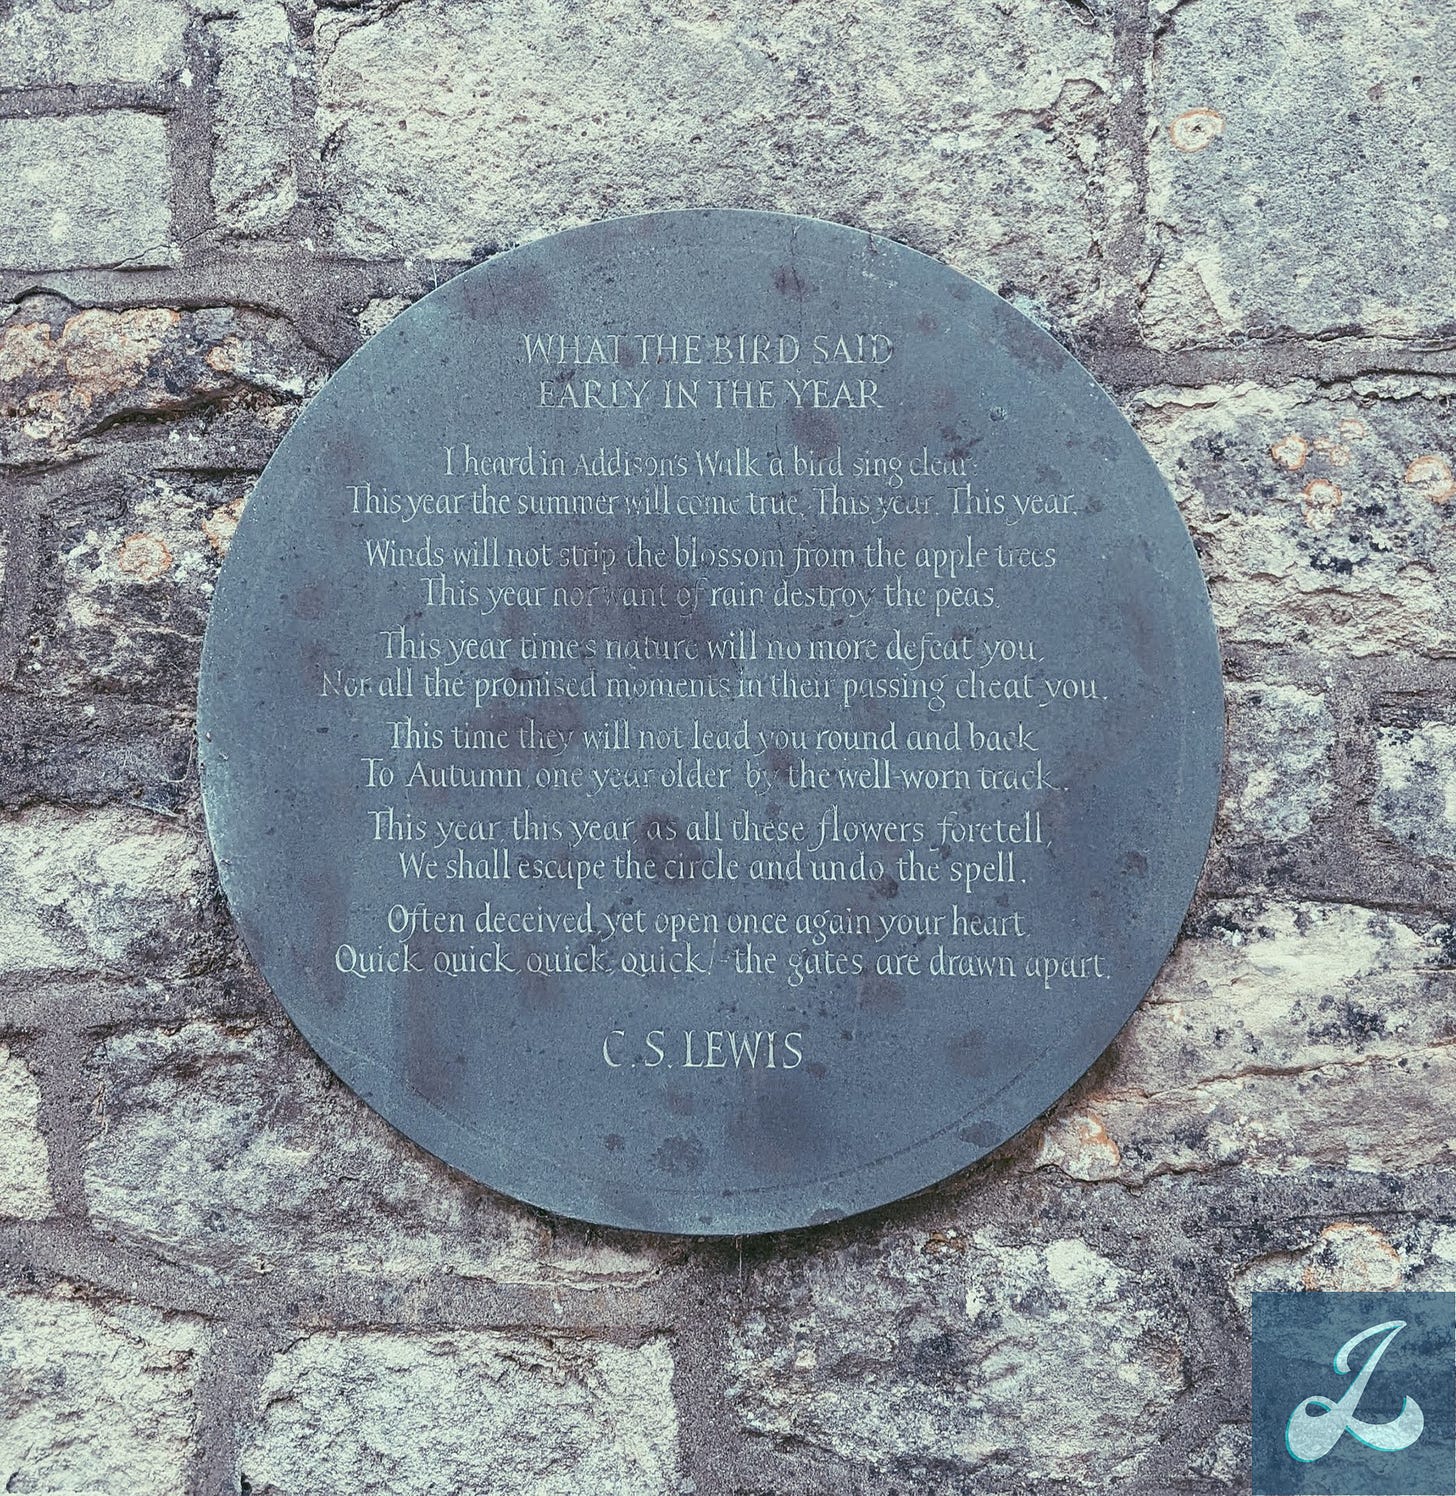 A worn, slightly rusted circular metal plaque posted on a stone wall that contains the text for the poem "What the Bird Said Early in the Year" by C. S. Lewis.